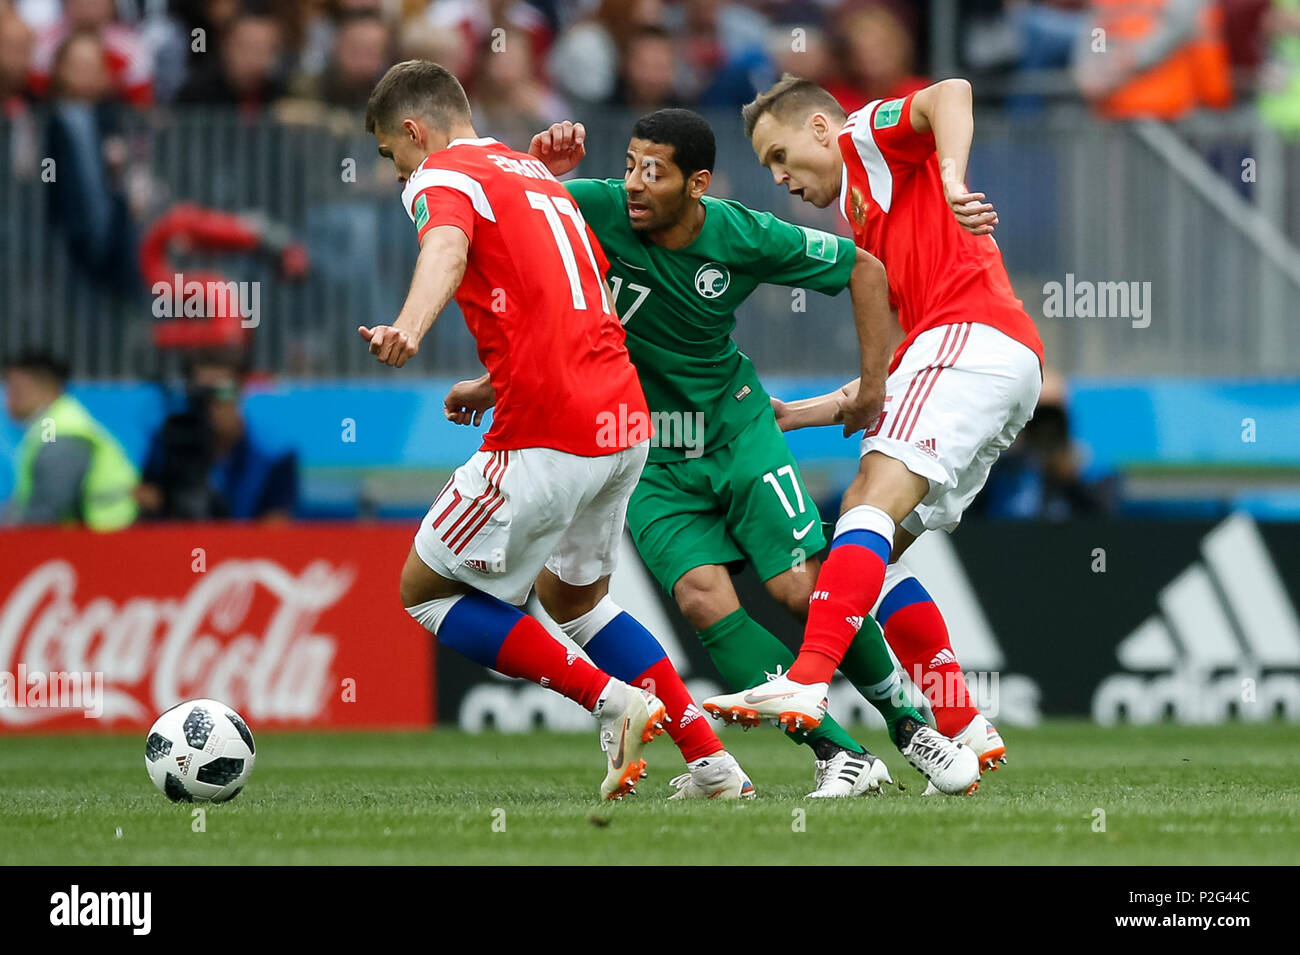 Moscow, Russia. 14th June 2018. Roman Zobnin of Russia, Taisir Al-Jassim of Saudi Arabia and Denis Cheryshev of Russia during the 2018 FIFA World Cup Group A match between Russia and Saudi Arabia at Luzhniki Stadium on June 14th 2018 in Moscow, Russia. Credit: PHC Images/Alamy Live News Stock Photo